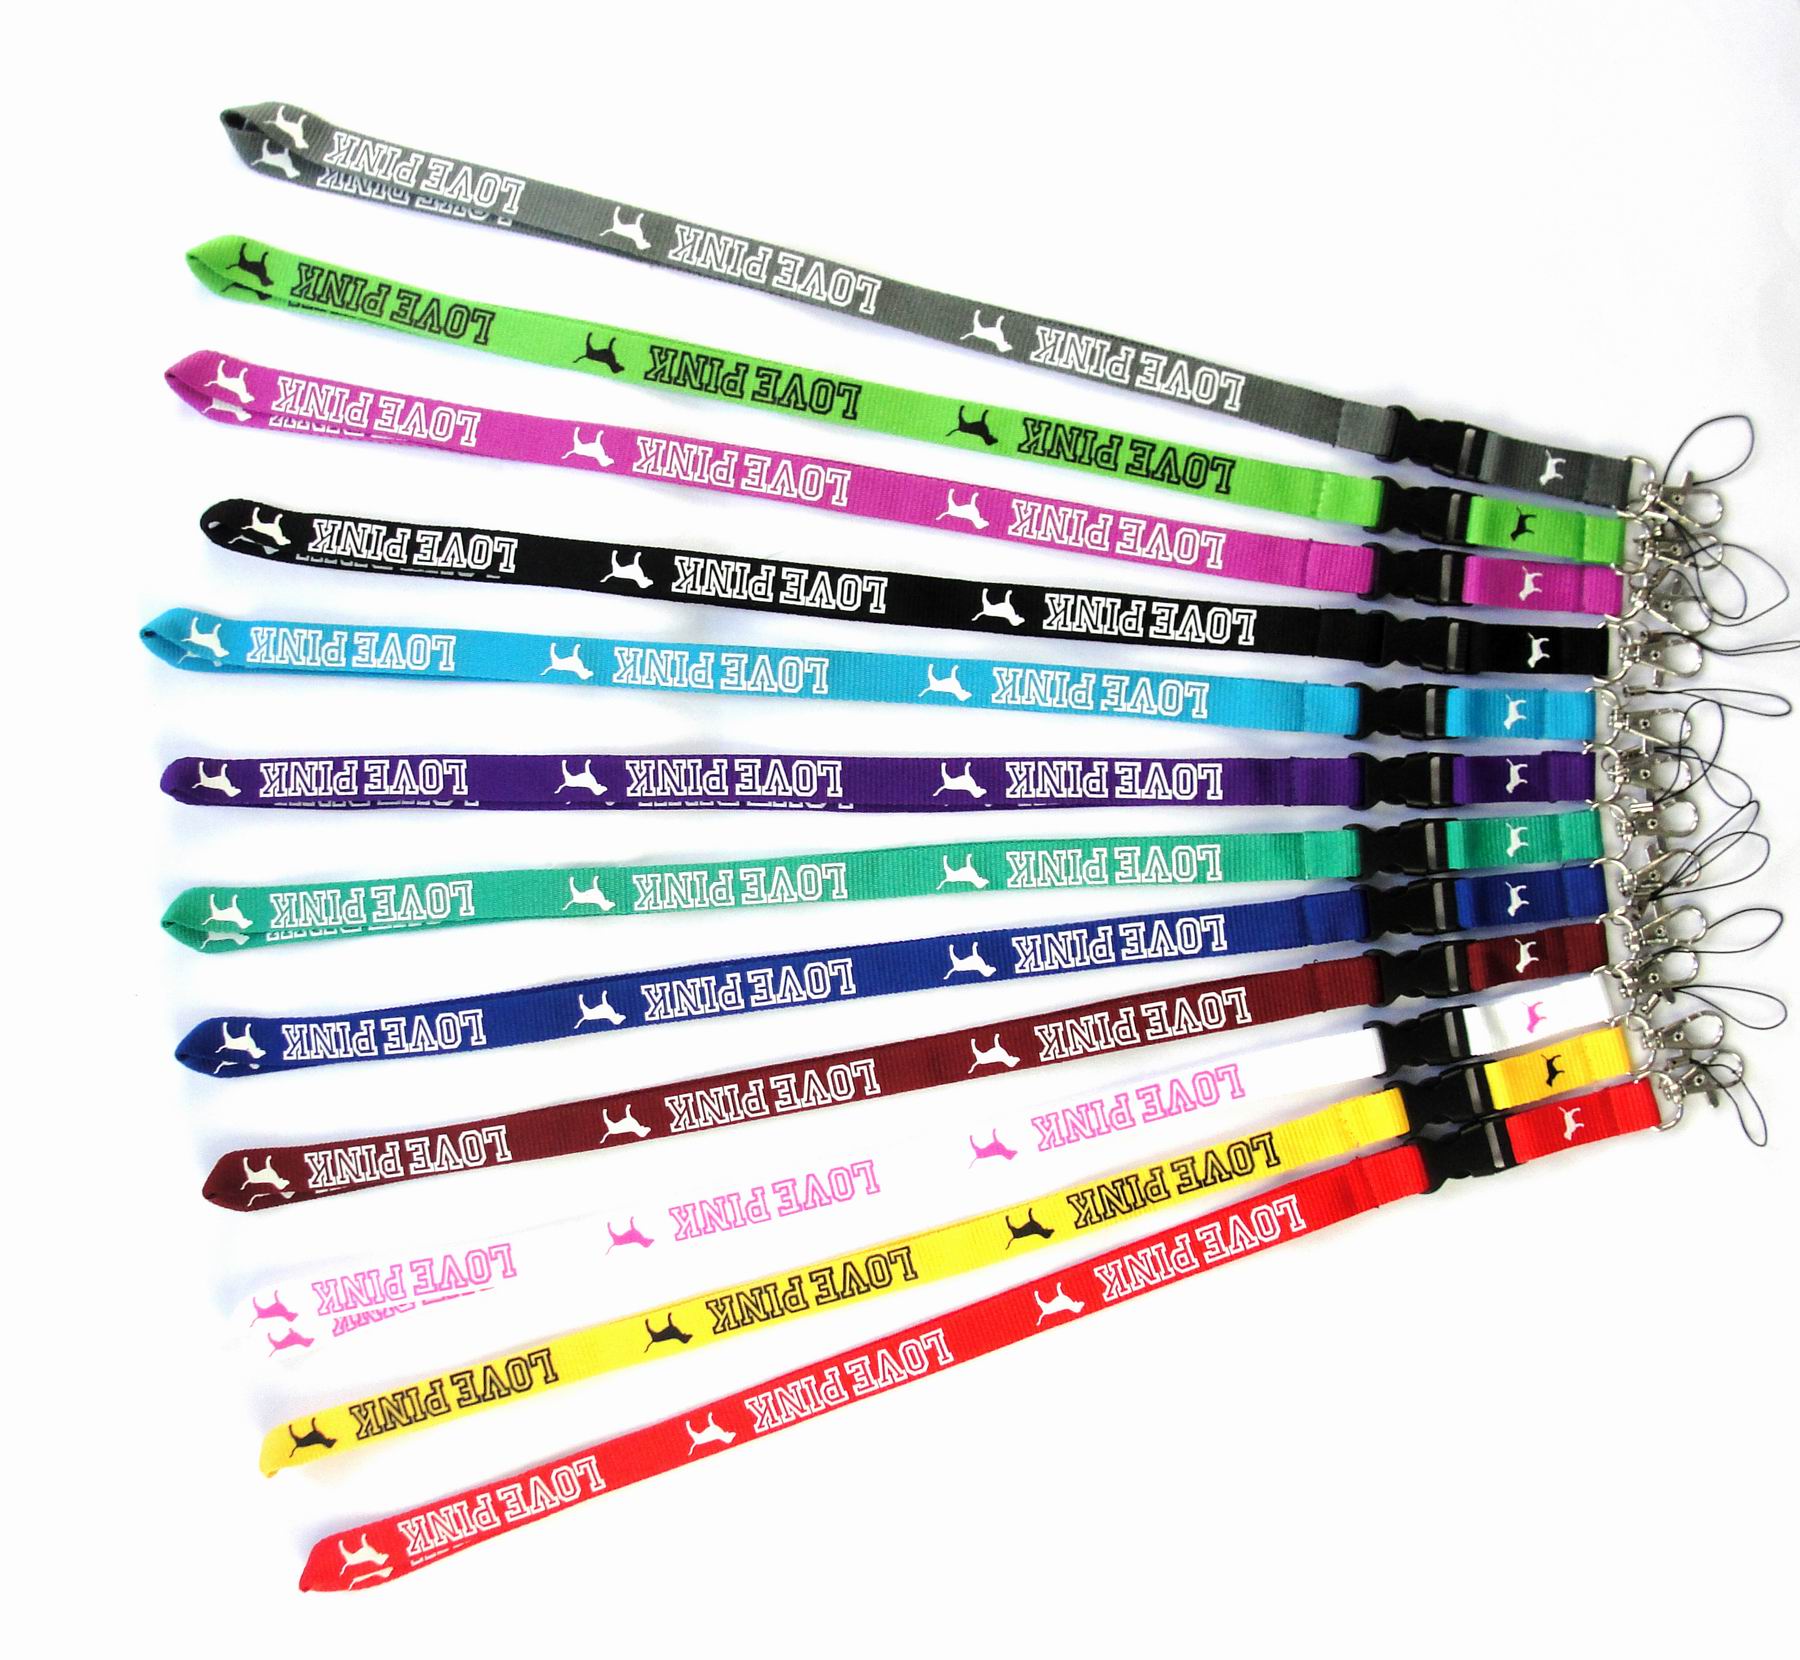 Hot Mobile Phone Lanyard Fashion personality Neck Strap Cute Lanyards for Keys ID Card Gym Mobile Phone Straps USB Badge lanyard